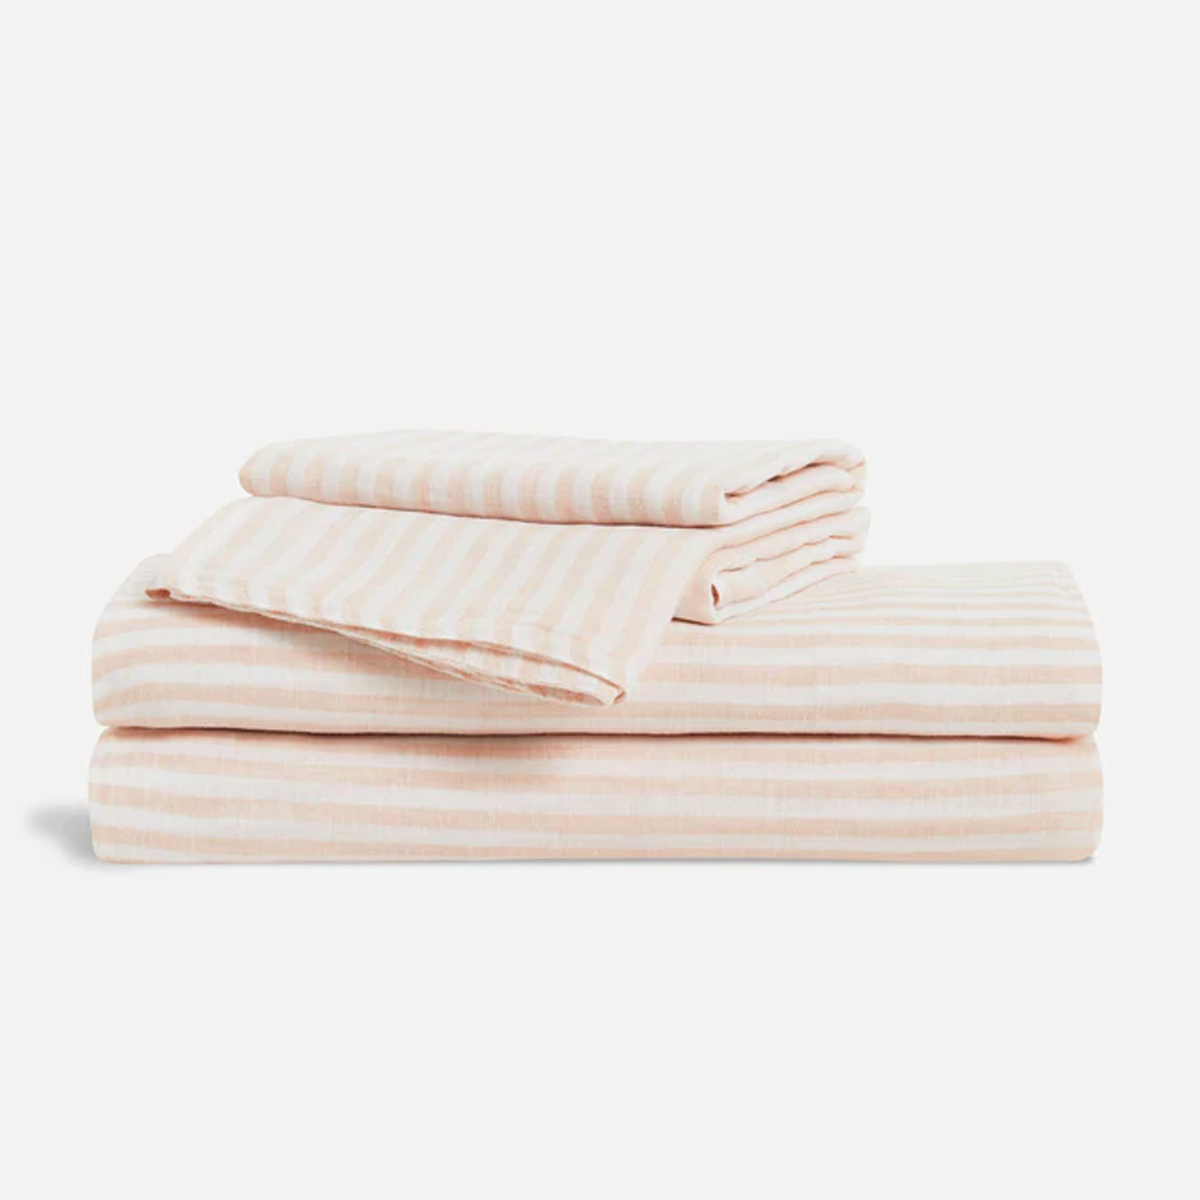 If they’ve been sleeping on the same set of sheets since freshman year, it’s high time to treat them to a luxe replacement. $299, Brooklinen. <a href="https://www.brooklinen.com/products/linen-core-sheet-set">Get it now!</a><p>Sign up for today’s biggest stories, from pop culture to politics.</p><a href="https://www.glamour.com/newsletter/news?sourceCode=msnsend">Sign Up</a>